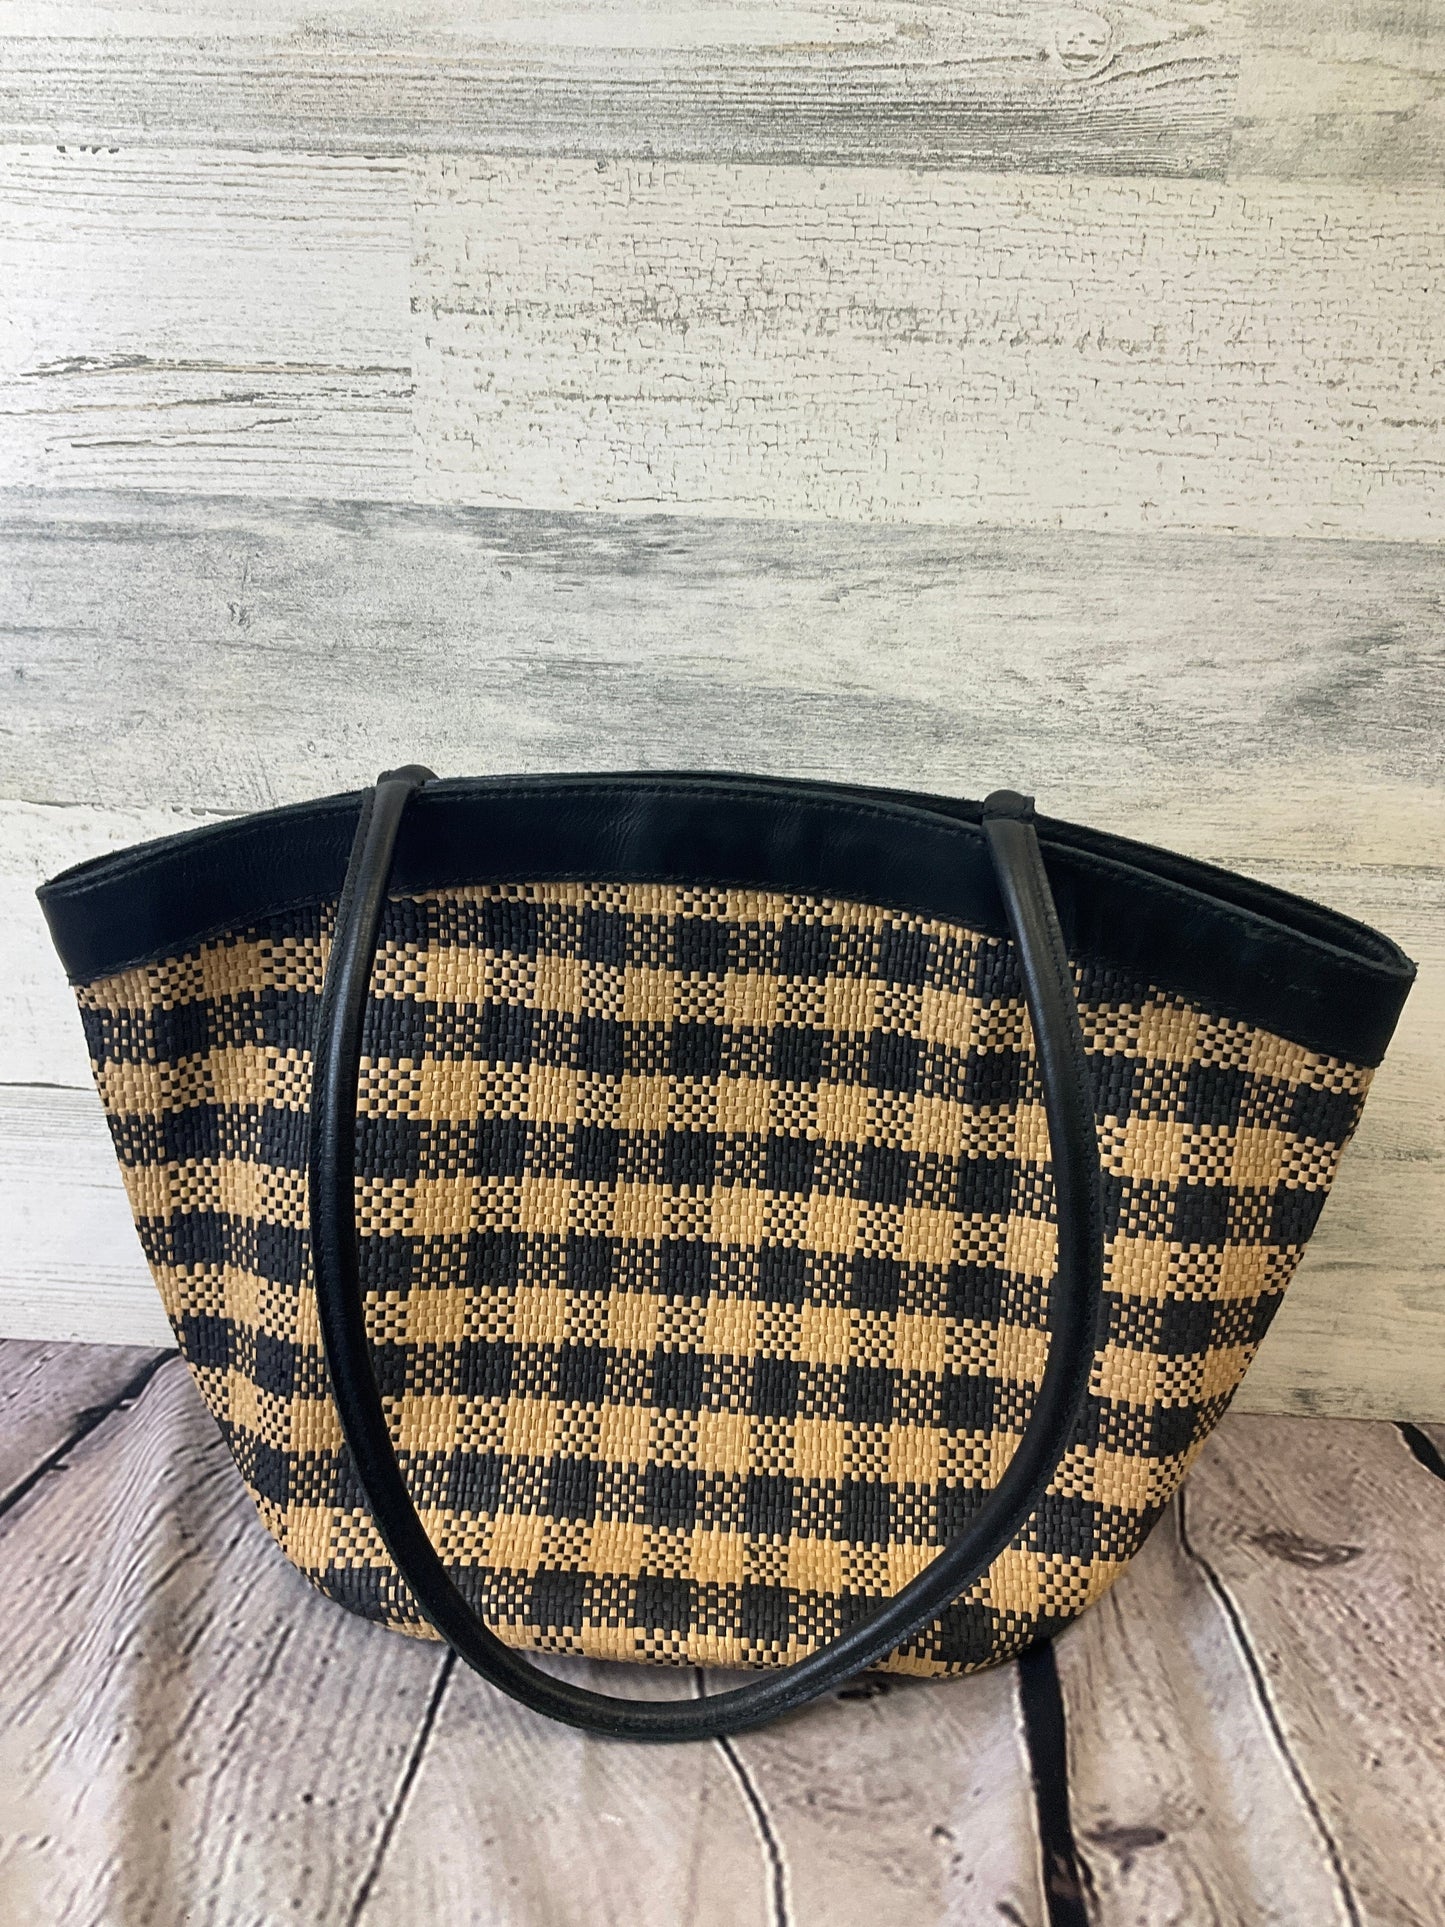 Tote Madewell, Size Small